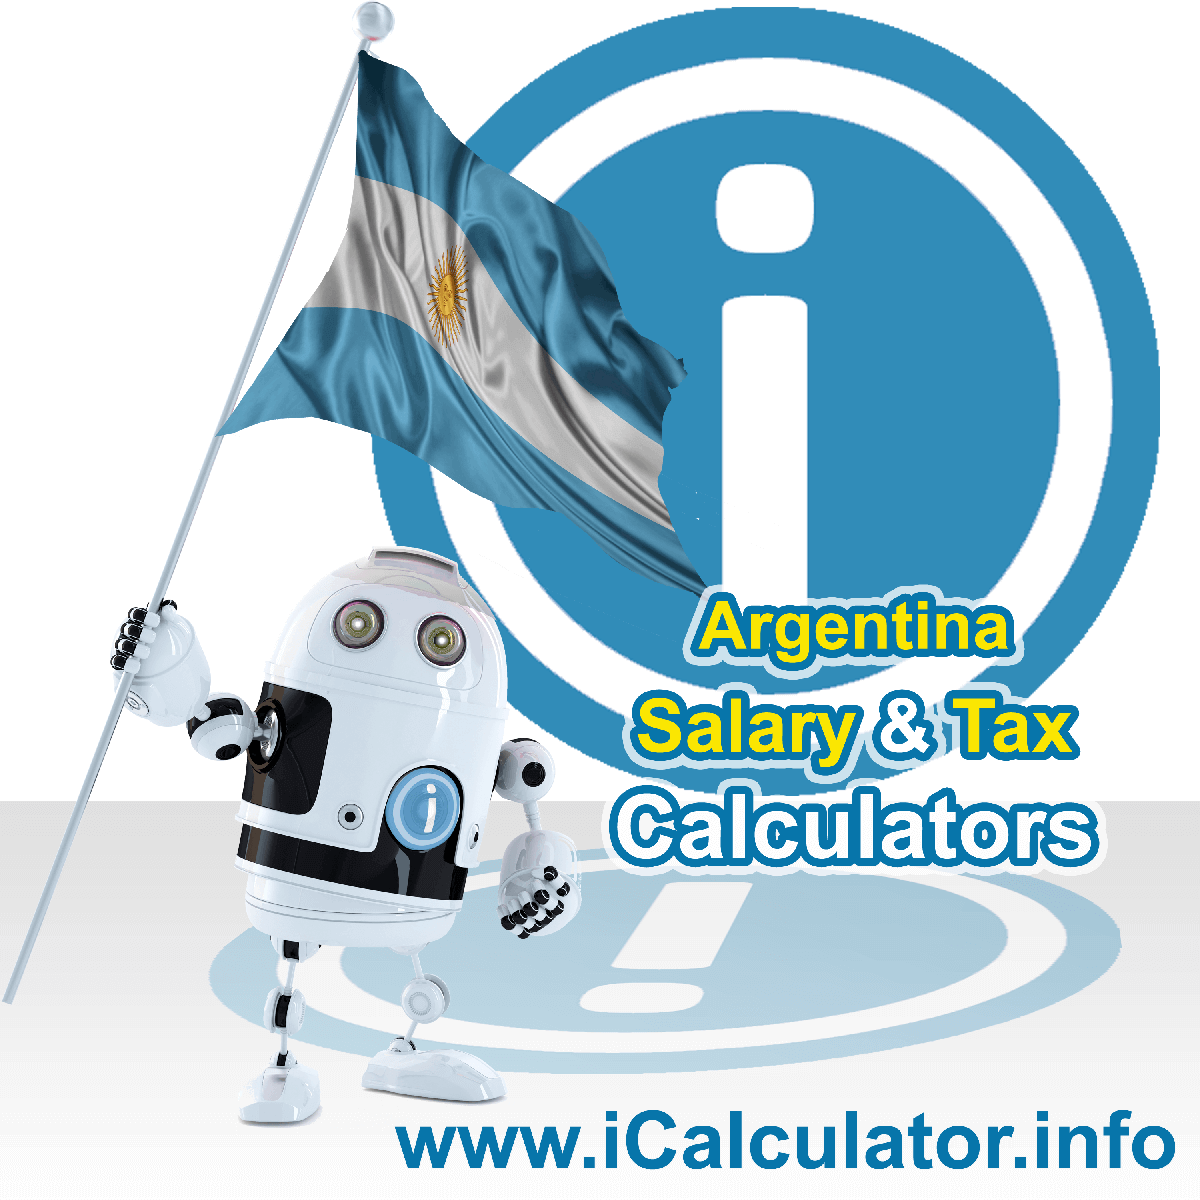 Argentina Tax Calculator. This image shows the Argentina flag and information relating to the tax formula for the Argentina Salary Calculator